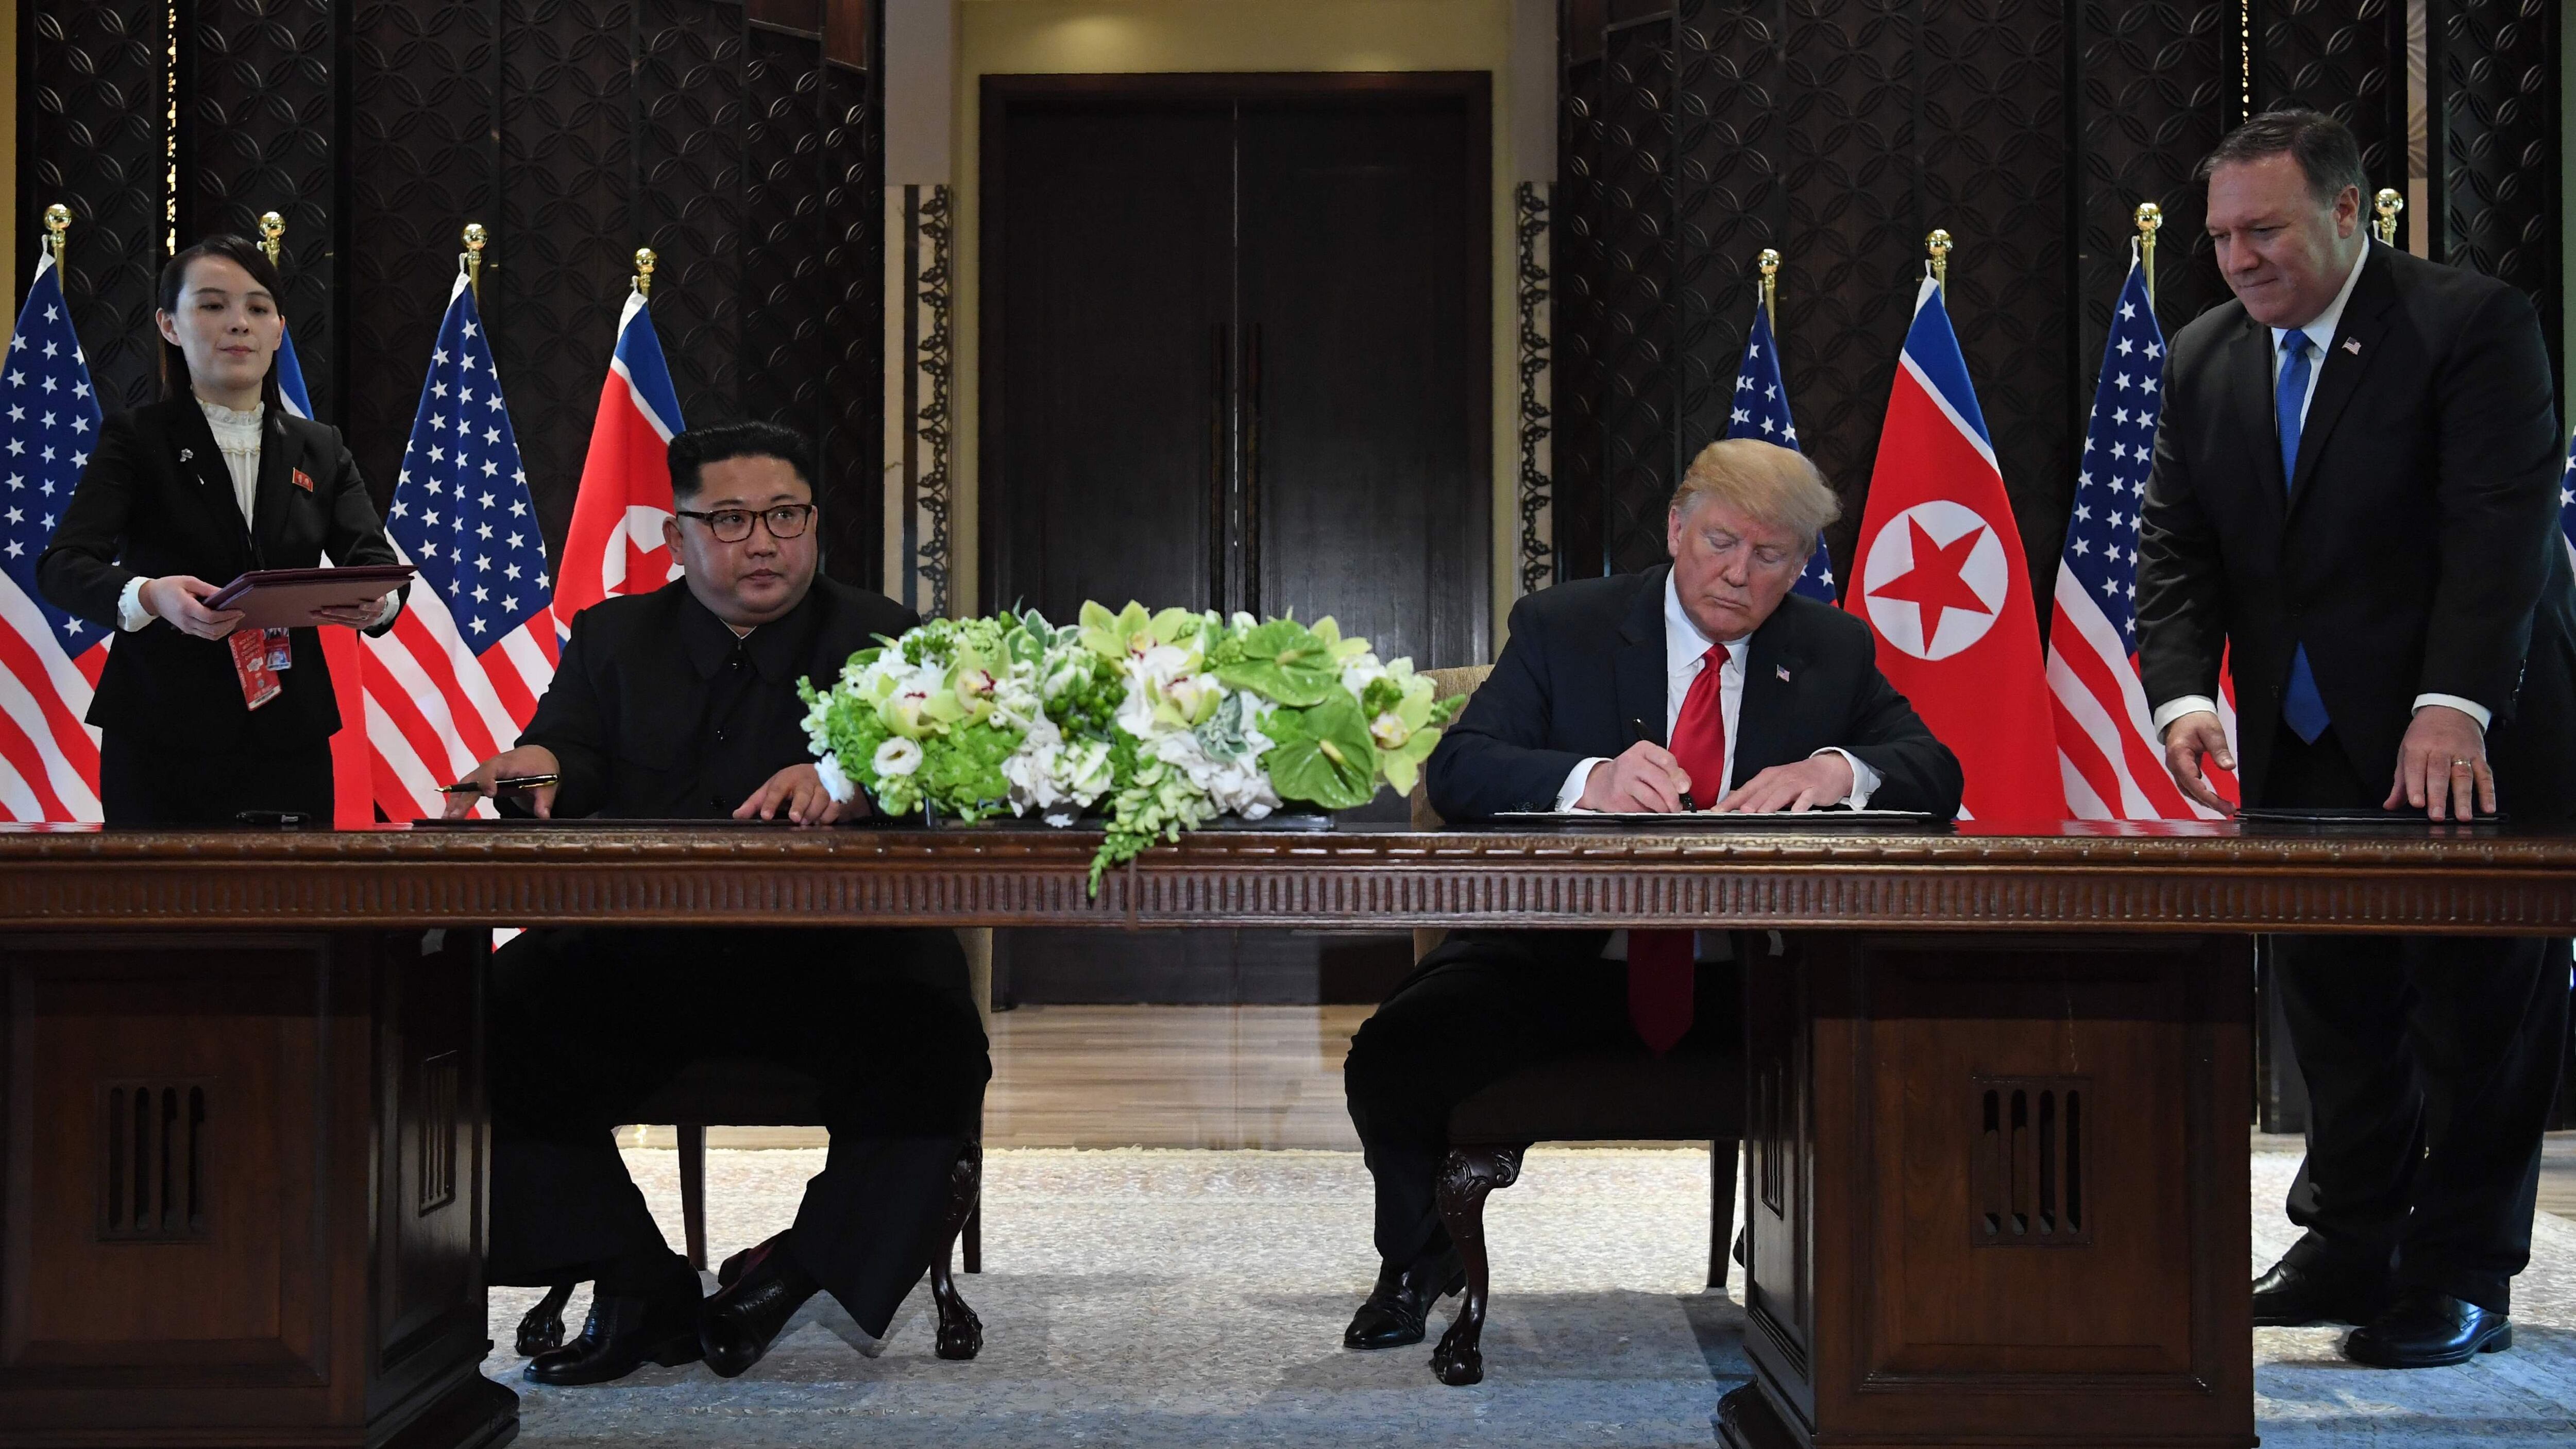 US President Donald Trump and North Korean leader Kim Jong-un sign documents as US Secretary of State Mike Pompeo (R) and North Korean leader Kim Yo's sister -jong, observe the ceremony during the historic summit between the two countries held in Singapore, on June 12, 2018. (Photo: AFP)
